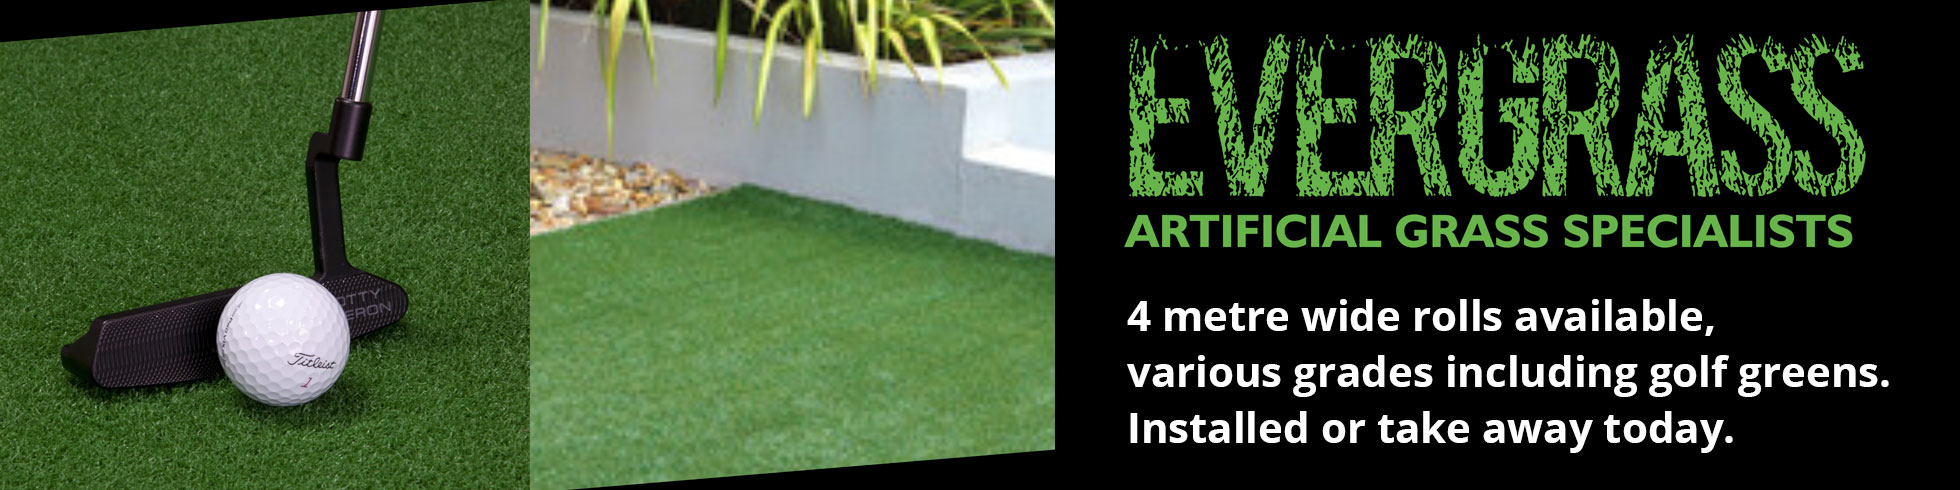 1st choice carpets and flooring wiltshire artifical grass